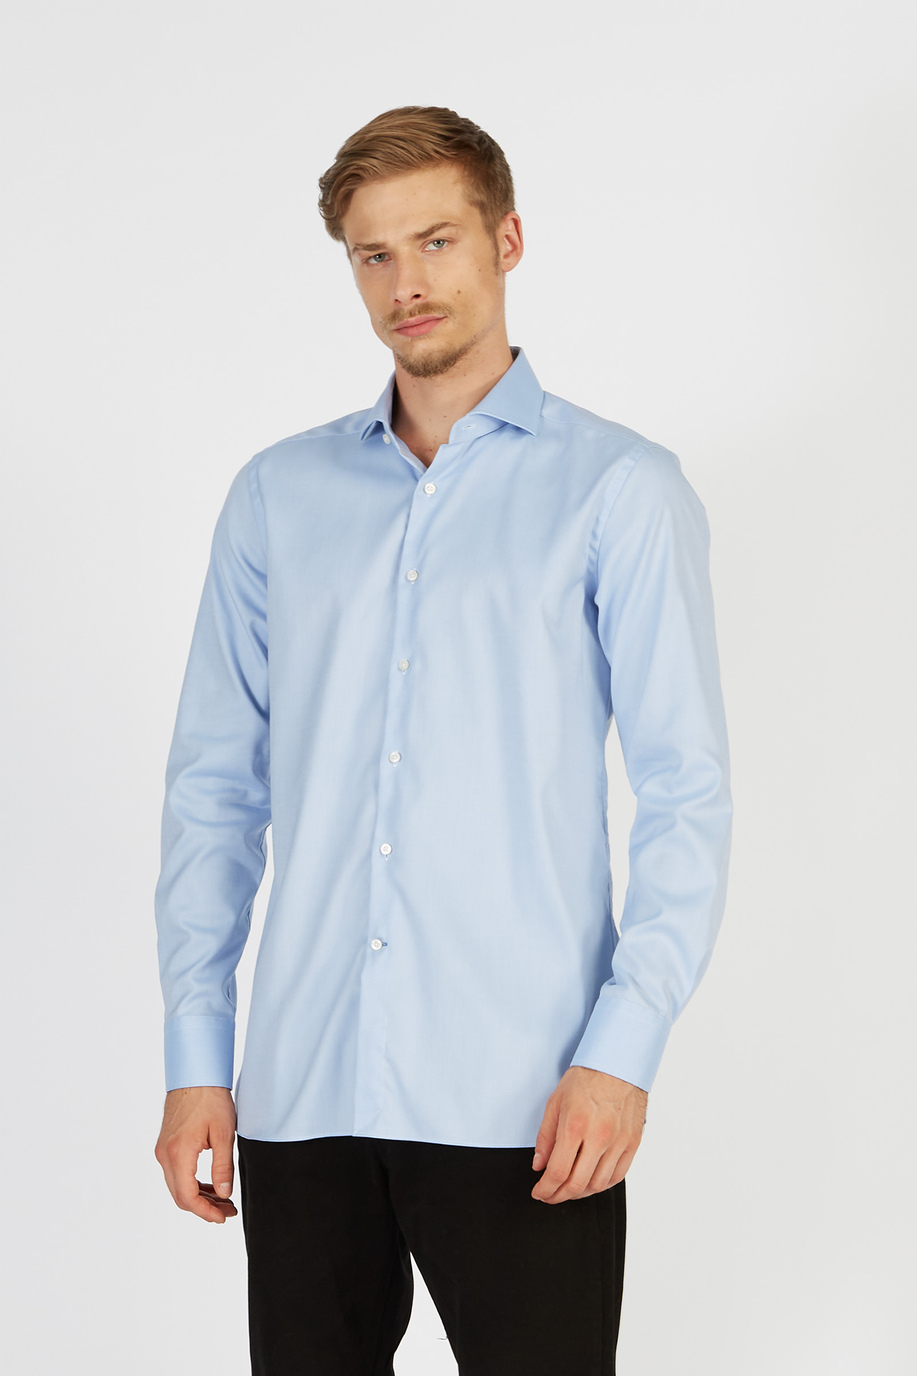 Classic style shirt for men in long-sleeved cotton - Paternò - Capsule | La Martina - Official Online Shop